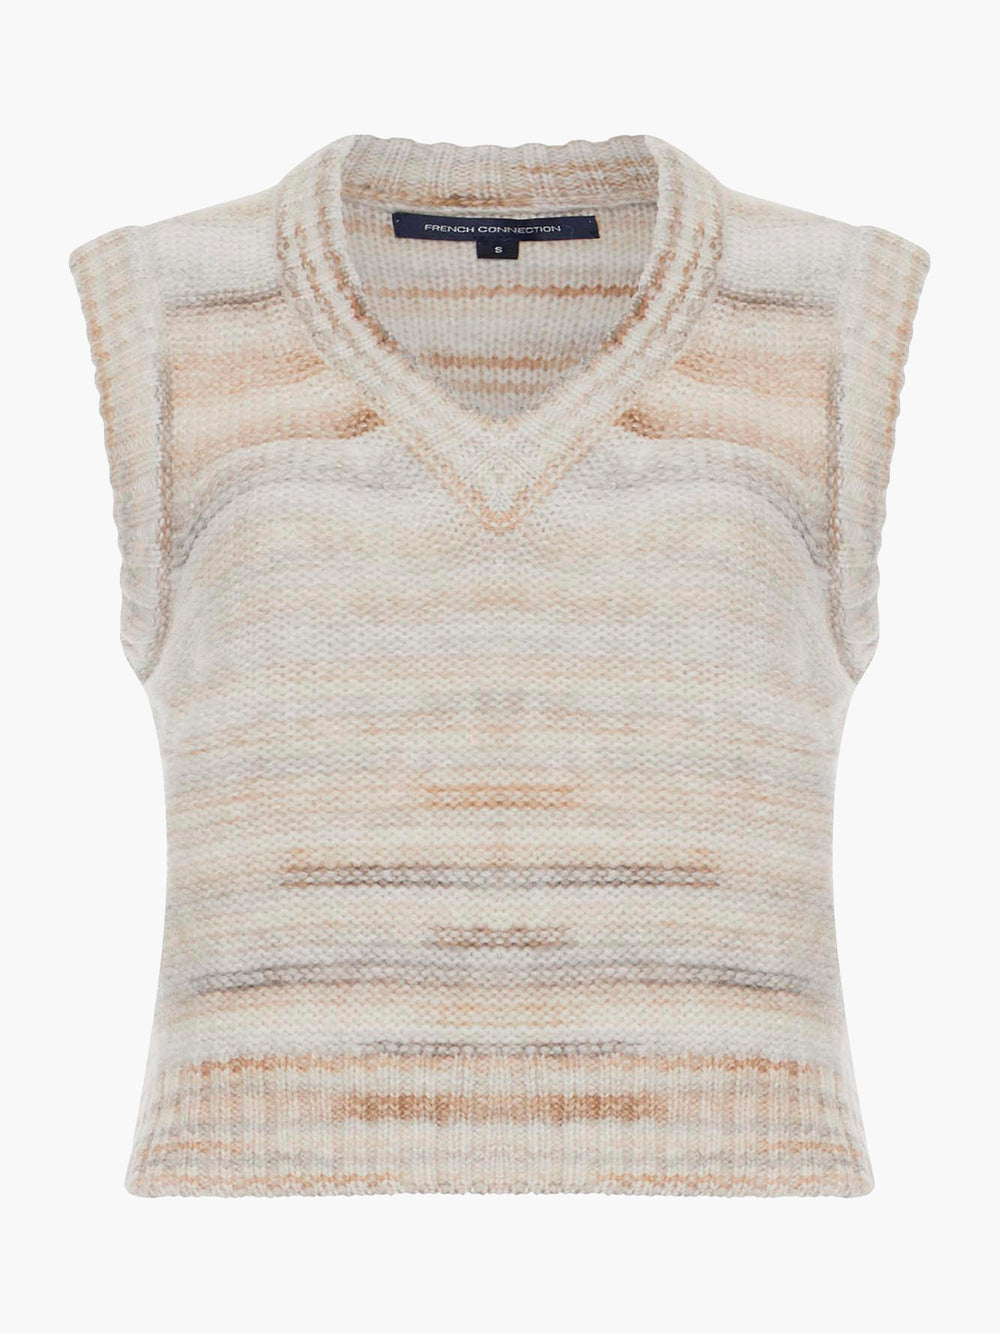 Maly Space Dye Vest Oatmeal Multi | French Connection UK